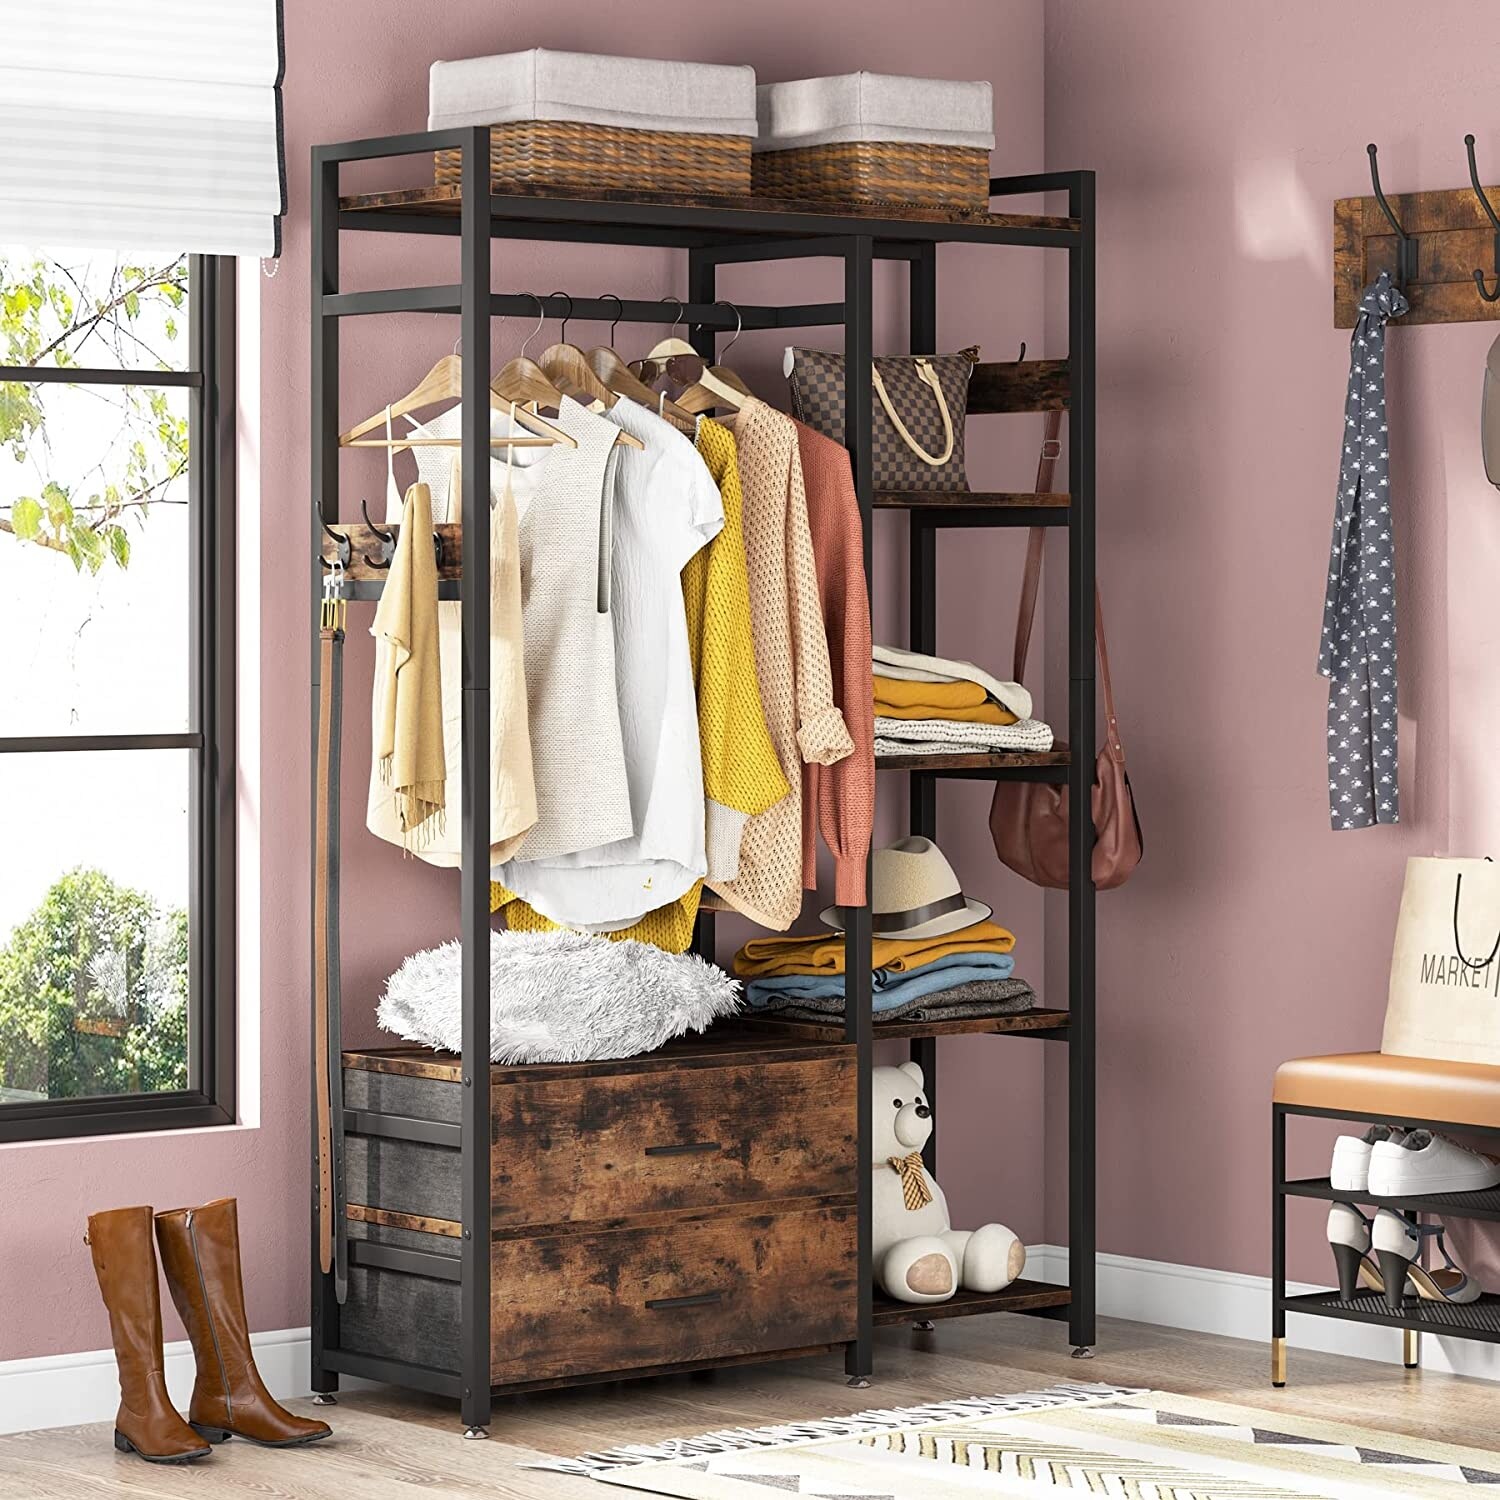 https://ak1.ostkcdn.com/images/products/is/images/direct/ee22d3ac786532260c82feadcf1ce9659a98c98a/Freestanding-Closet-Organizer%2C-Clothes-Rack-with-Drawers%2C-Heavy-Duty-Garment-Rack-Hanging-Clothing--Brown.jpg